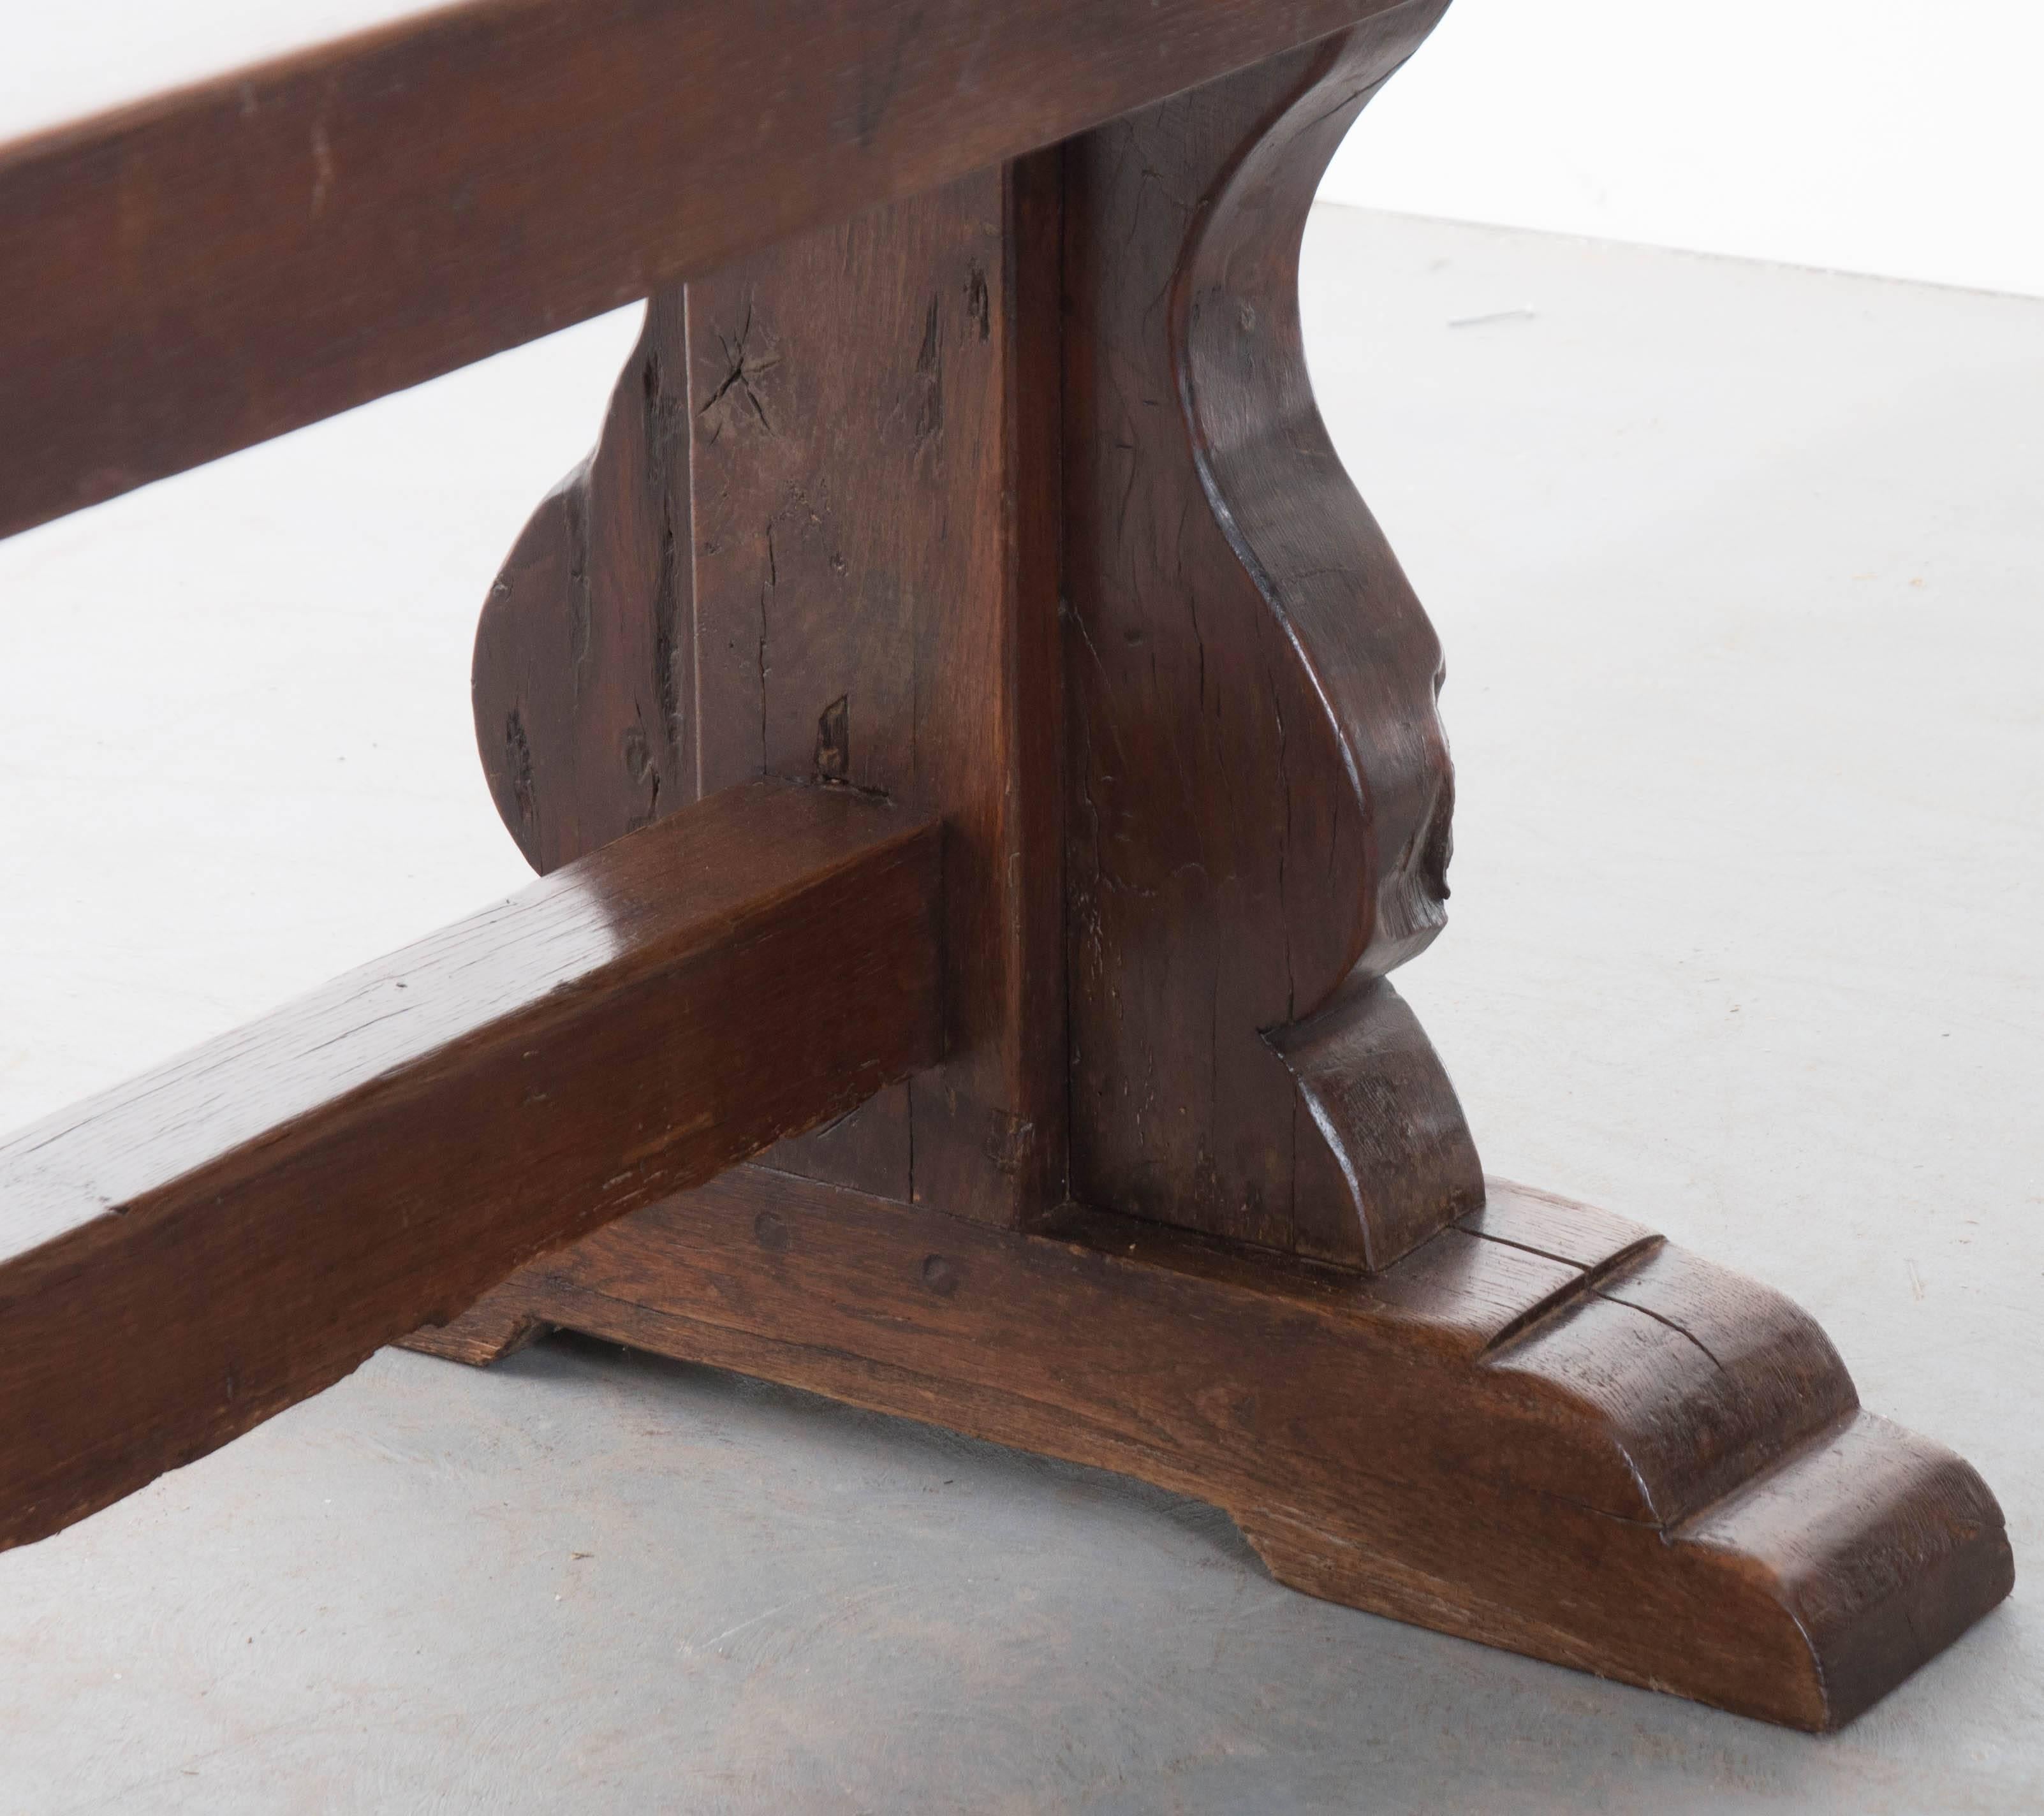 Thick slabs of solid oak were employed to create this stunning French oak trestle table from the early part of the 19th century. The Primitive oak has achieved a remarkable patina over the course of its lifetime, having entertained many guests in